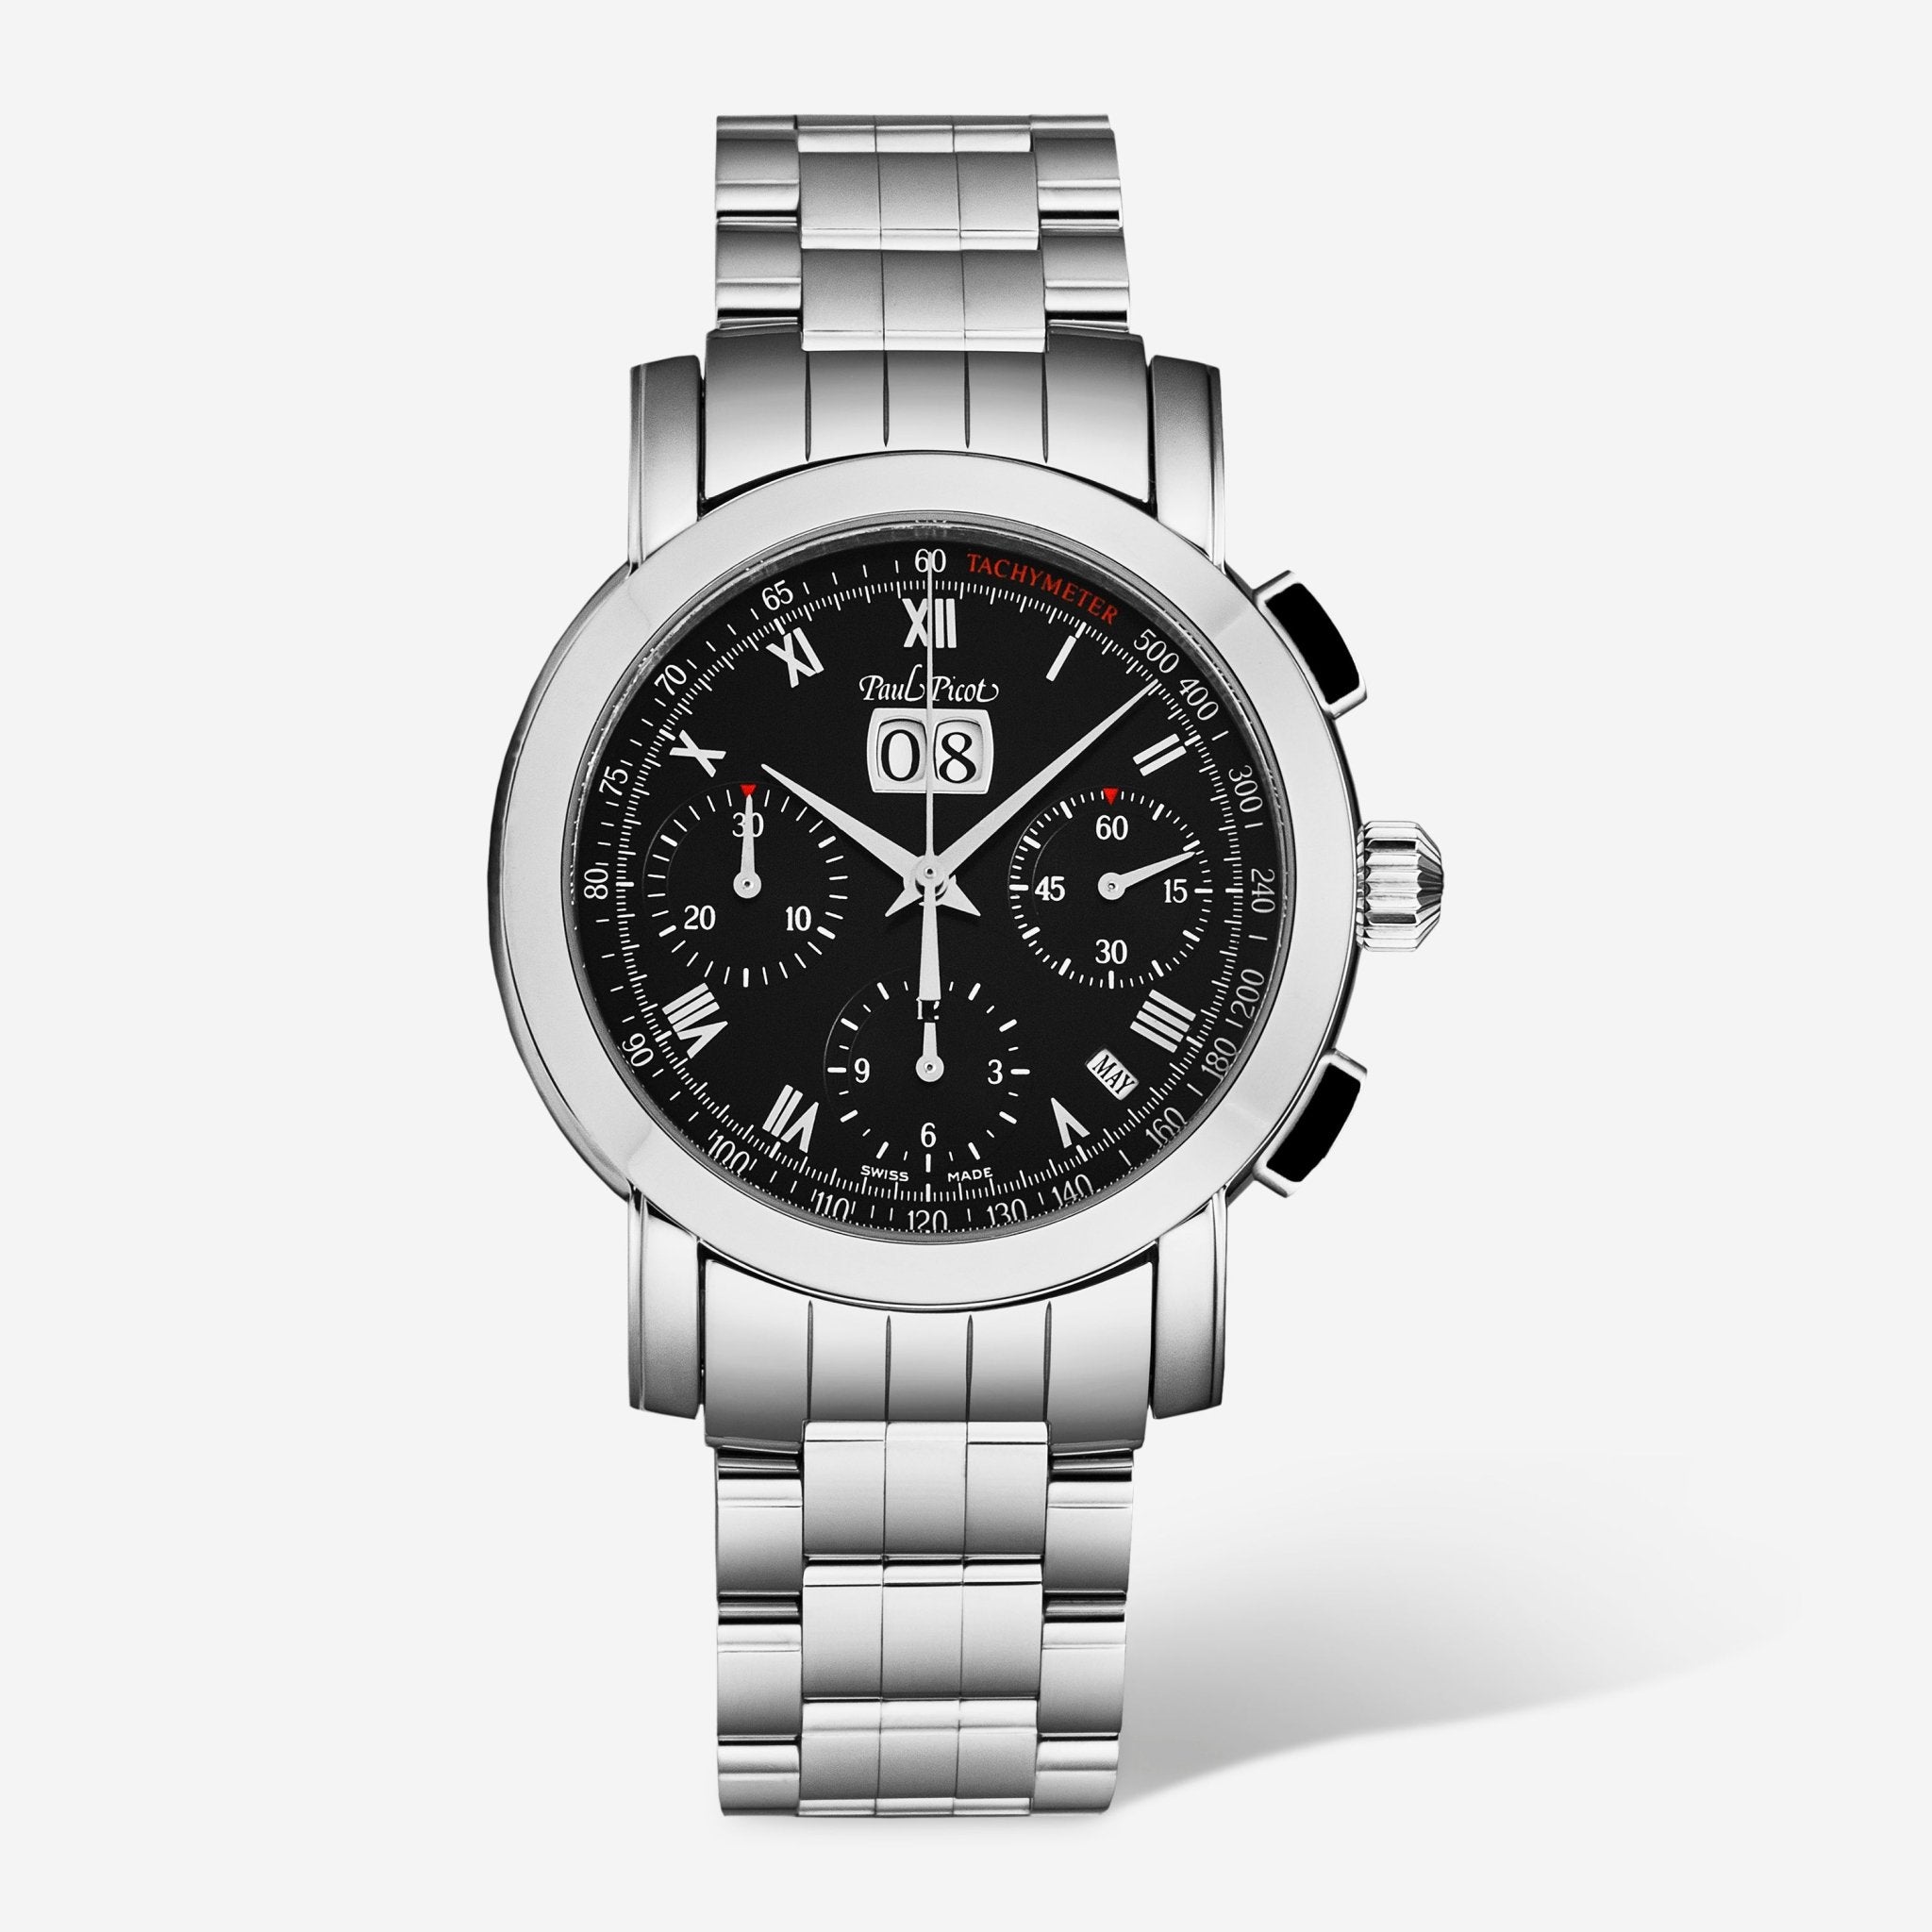 Paul Picot Firshire Chronograph Black Dial Stainless Steel Men's Automatic Watch P7045.20.331 - THE SOLIST - Paul Picot